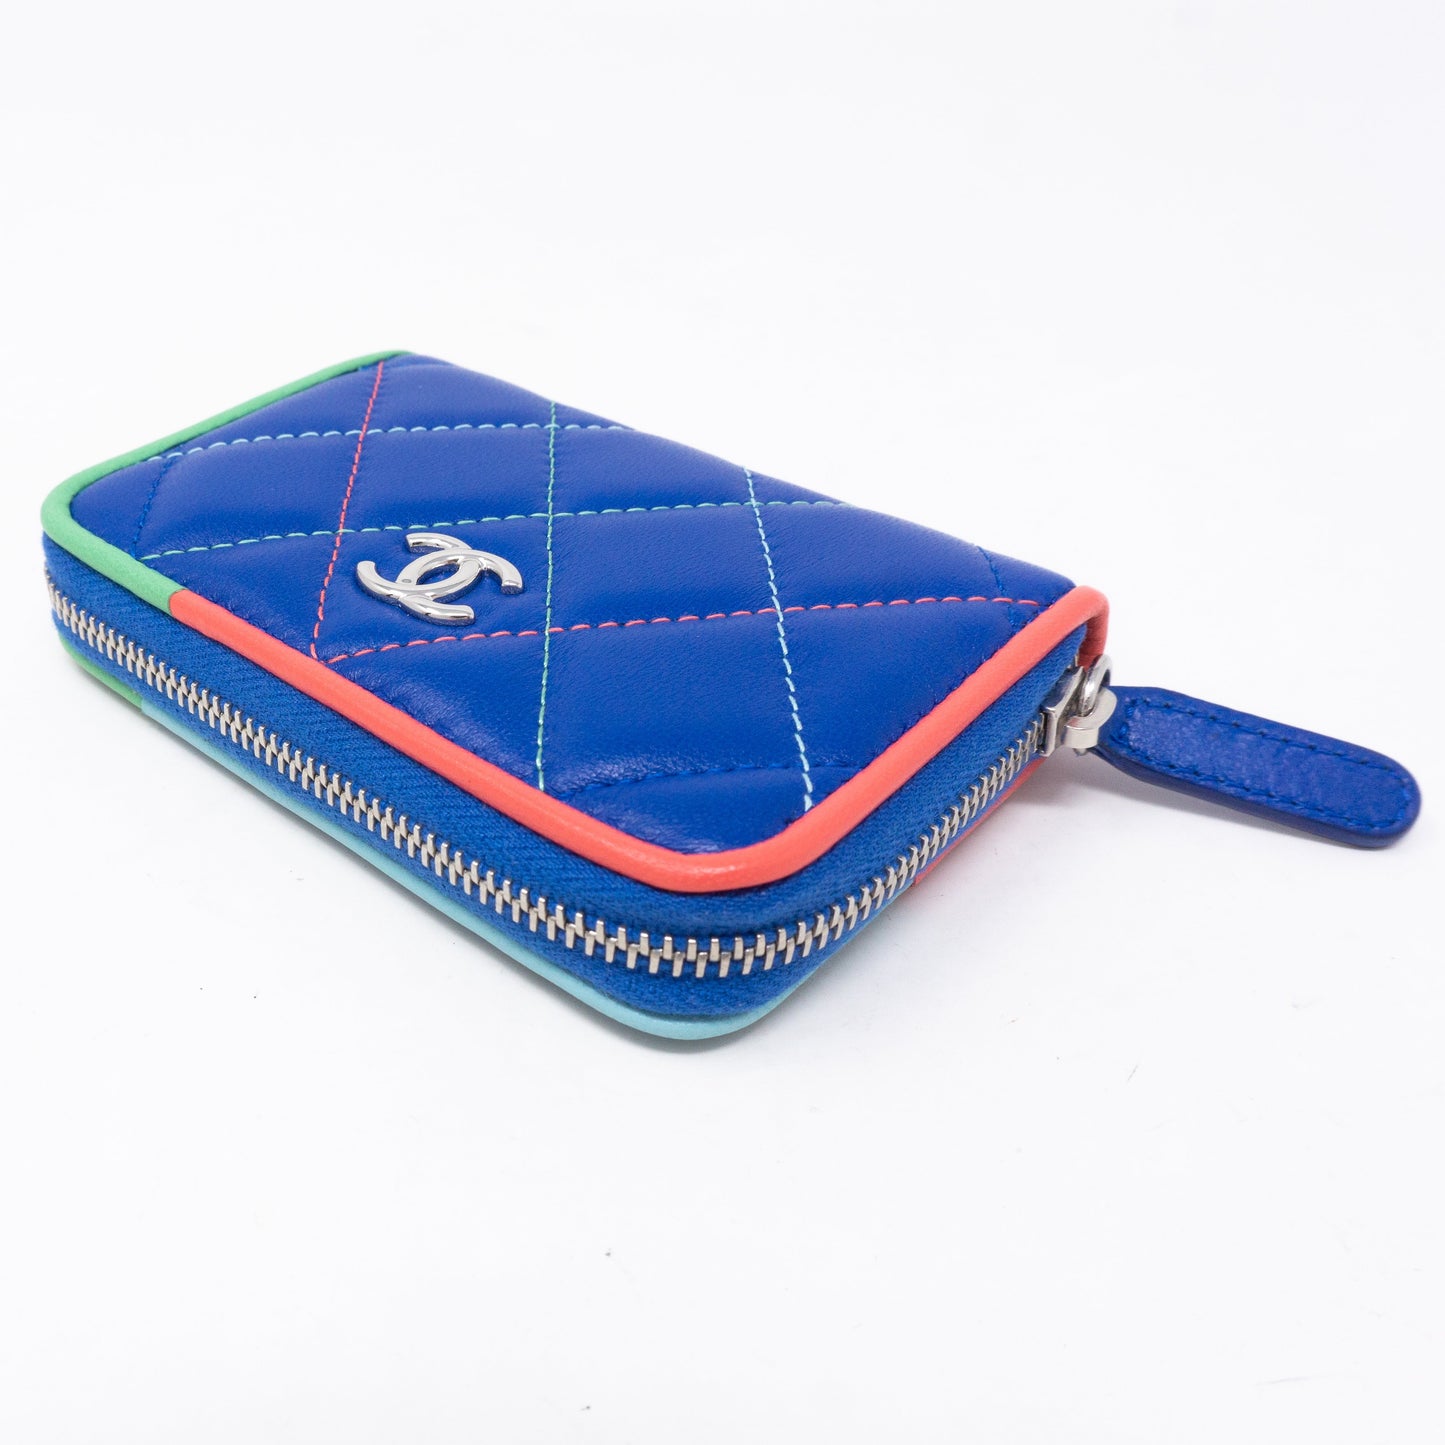 Zipped Coin Purse Blue Pastel Leather